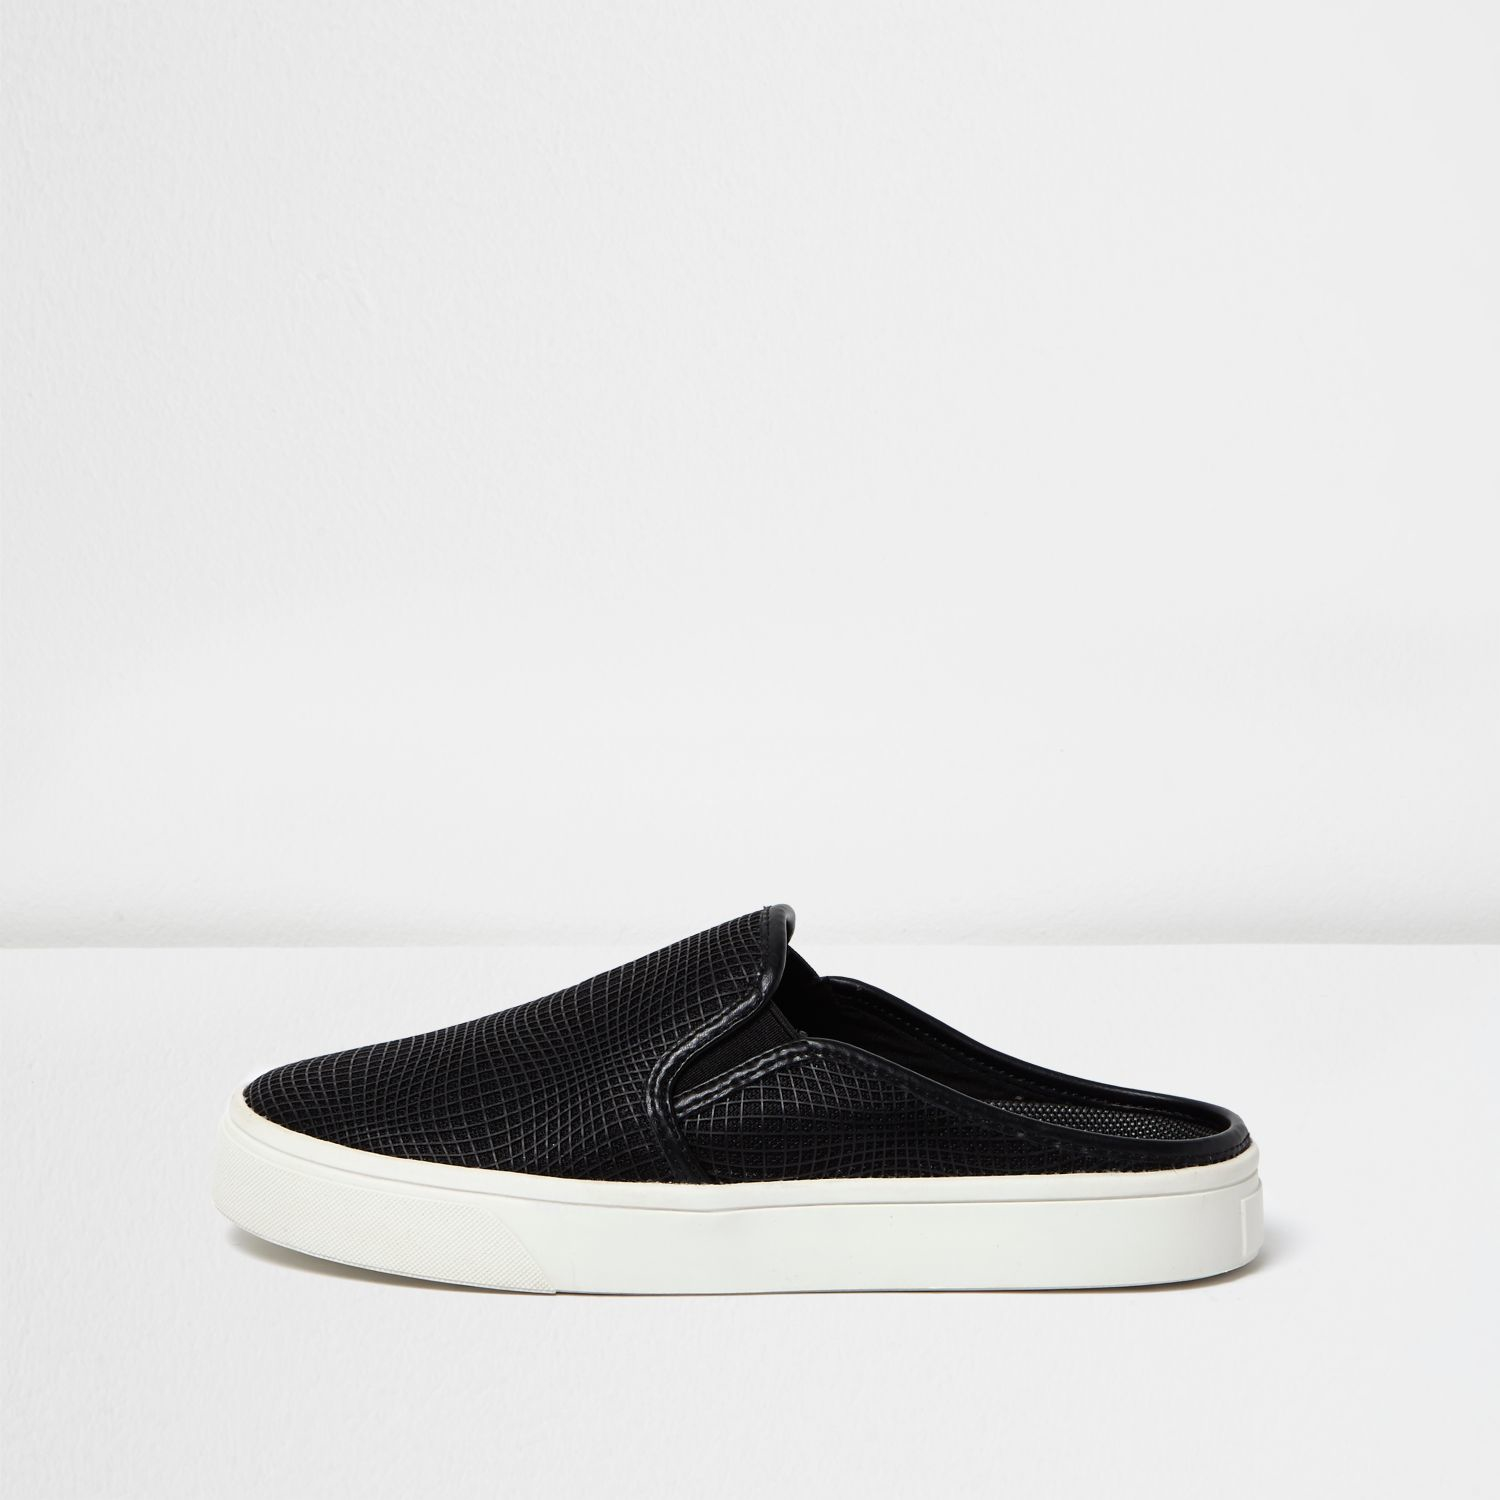 River island Black Textured Backless Plimsolls in Multicolor | Lyst